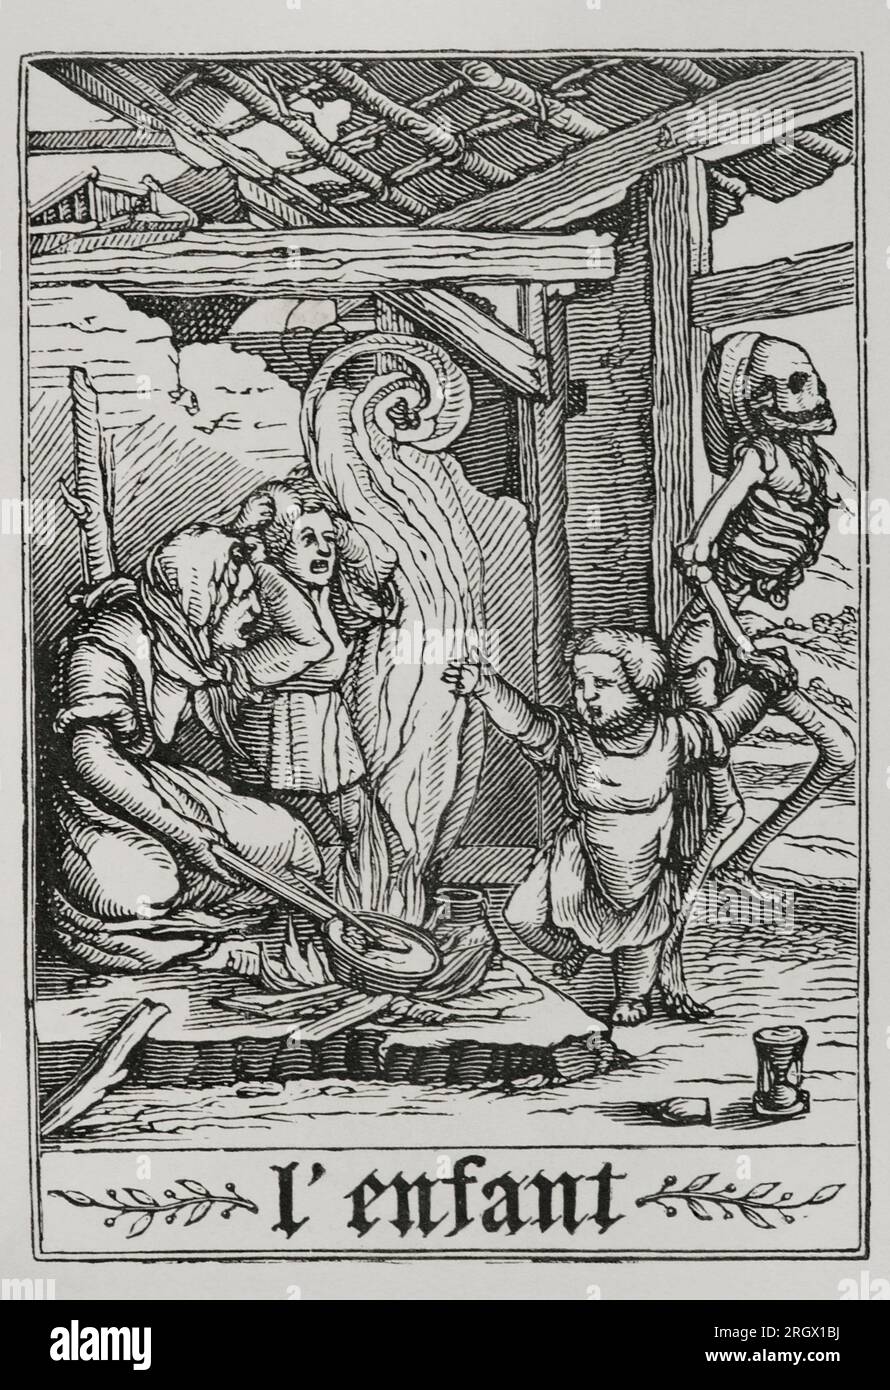 The Child. Death visits a child who is at home, with symptoms of being ill and at the moment when the family is cooking on a bonfire. Death takes the child by the hand and leads him out of the house. Facsimile of an engraving belonging to the series 'The Dance of Death' by Hans Holbein the Younger, in 'Les Simulacres de la Mort', 1538. 'Vie Militaire et Religieuse au Moyen Age et a l'Epoque de la Renaissance' . Paris, 1877. Stock Photo